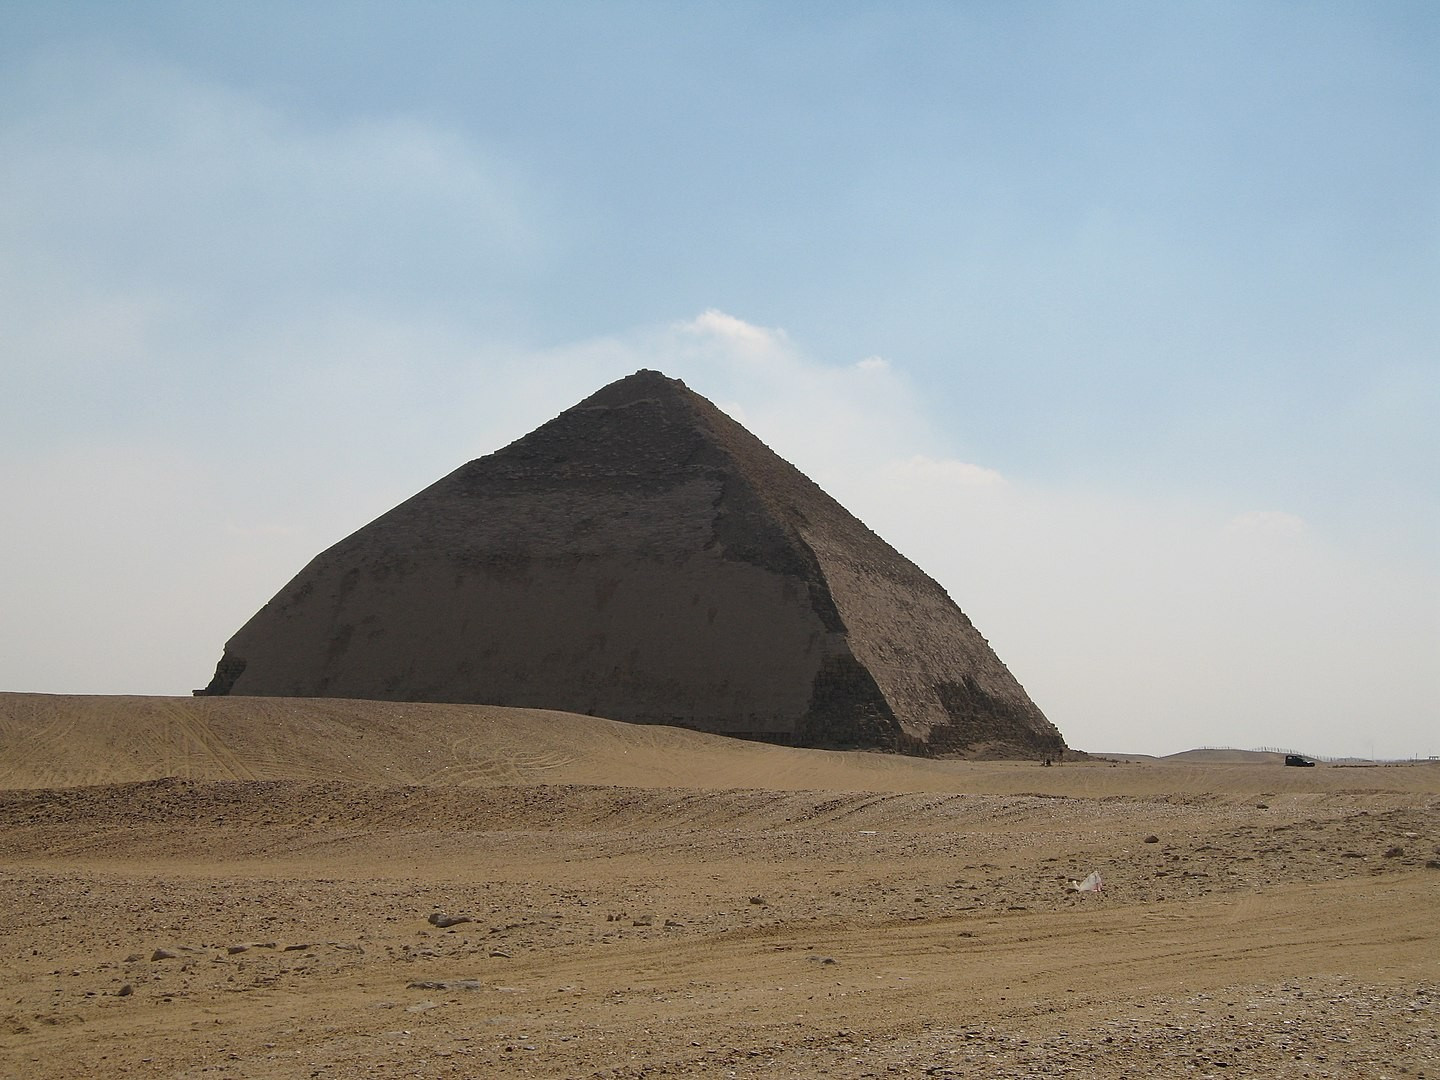 By Kristina from Magdeburg, Germany - The bent pyramid, CC BY 2.0, https://commons.wikimedia.org/w/index.php?curid=2601915